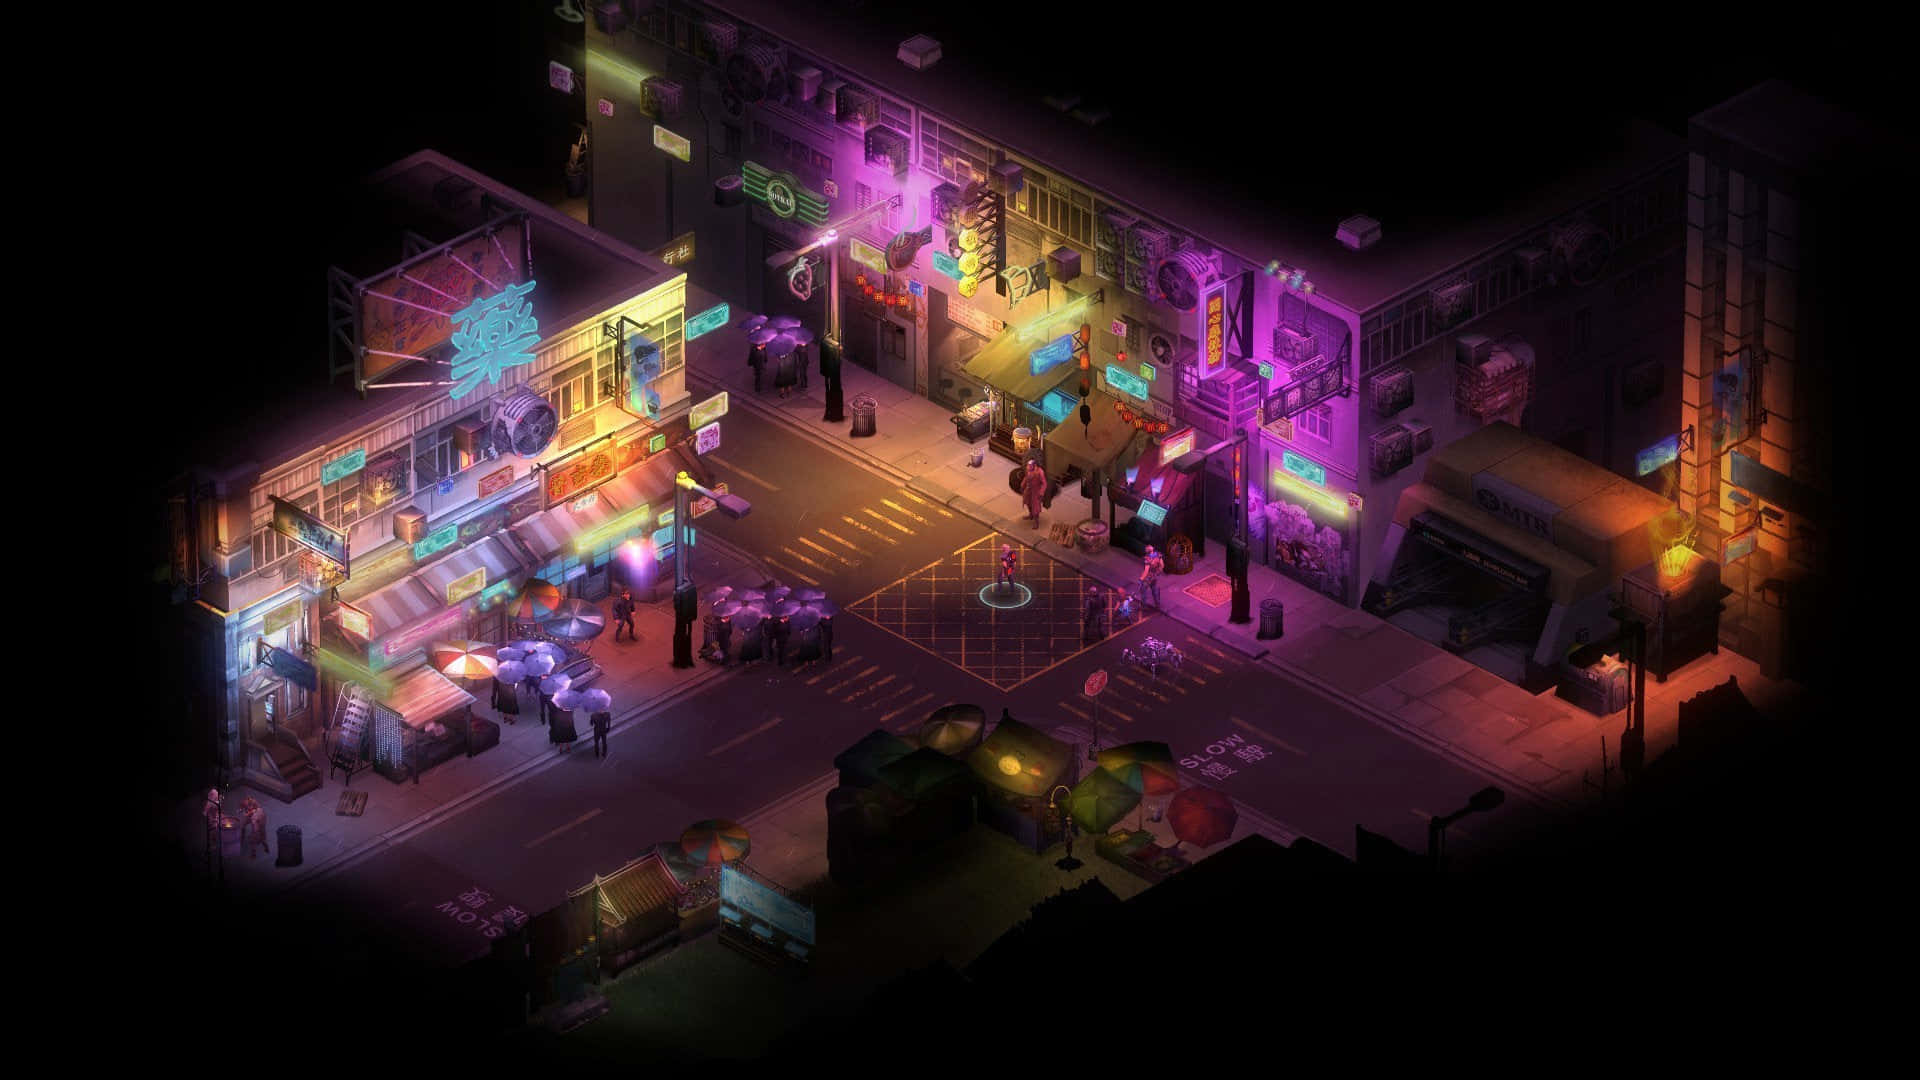 Mysterious inhabitants of a cyberpunk future, depicted in the video game Shadowrun Wallpaper